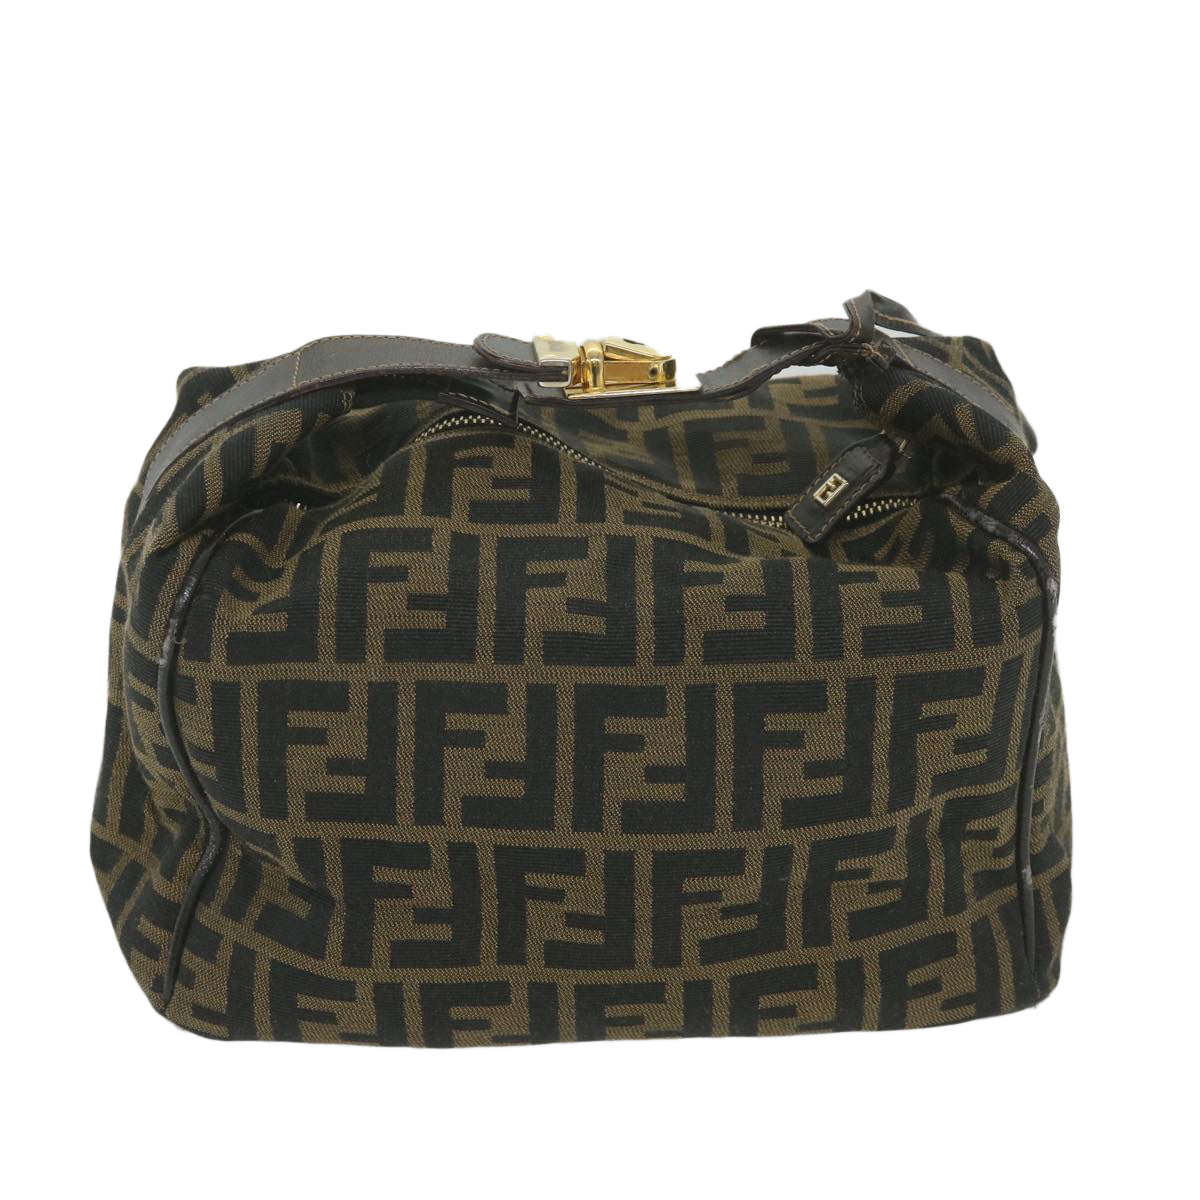 FENDI Zucca Canvas Vanity Cosmetic Pouch Black Brown Auth 59688